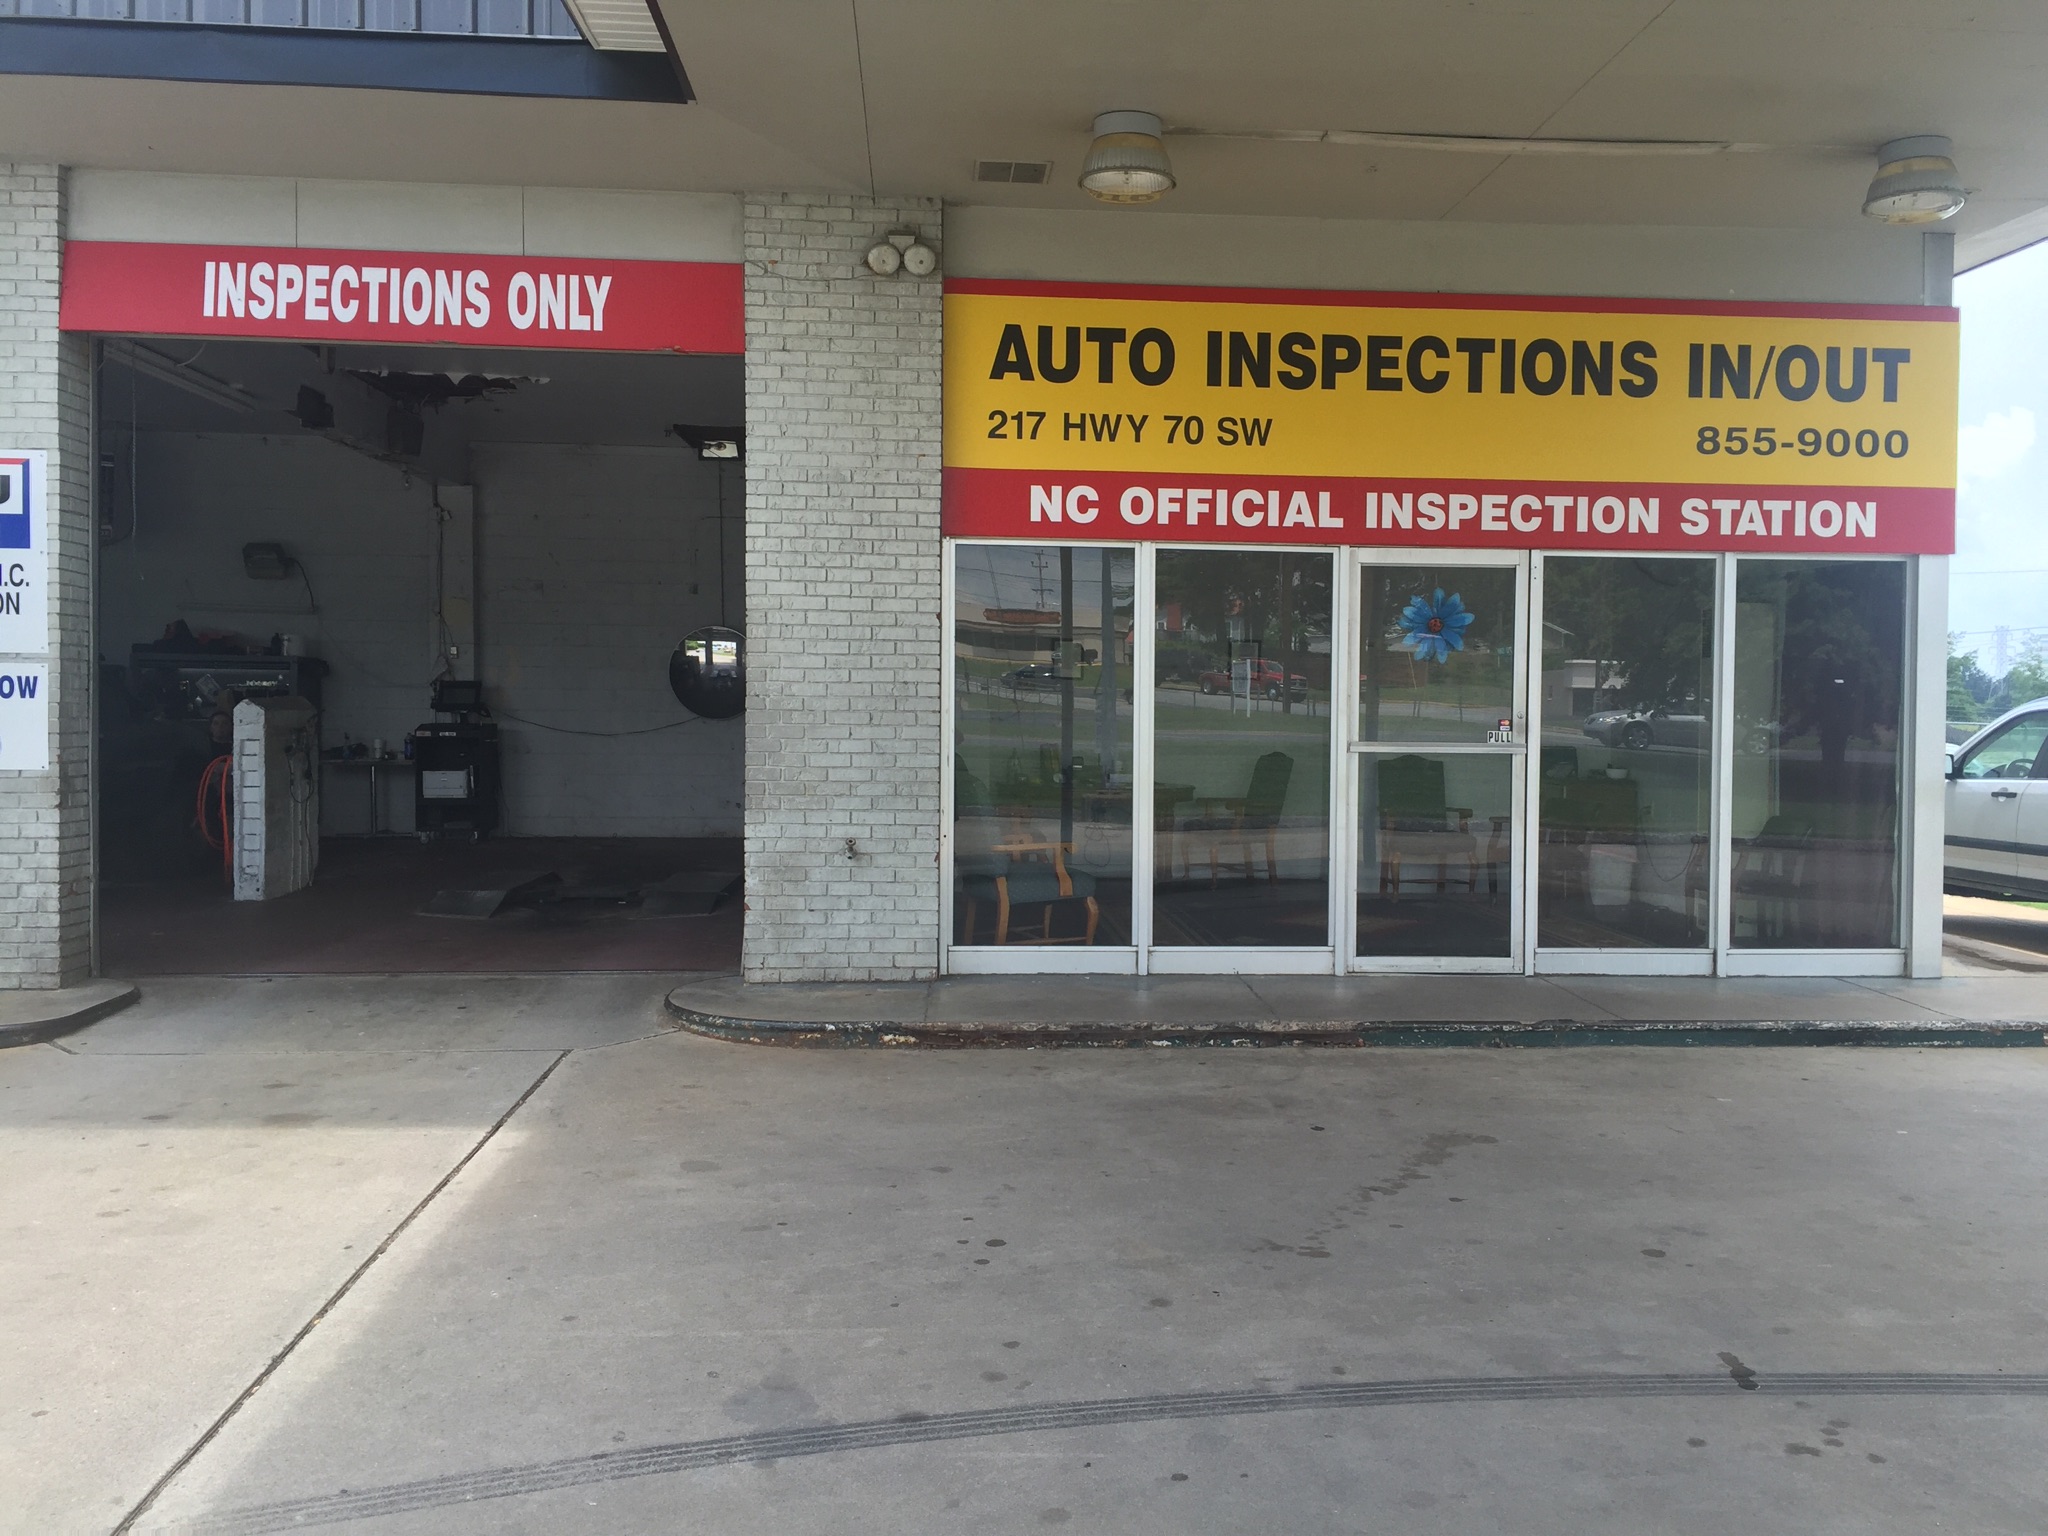 Auto Inspections In/Out